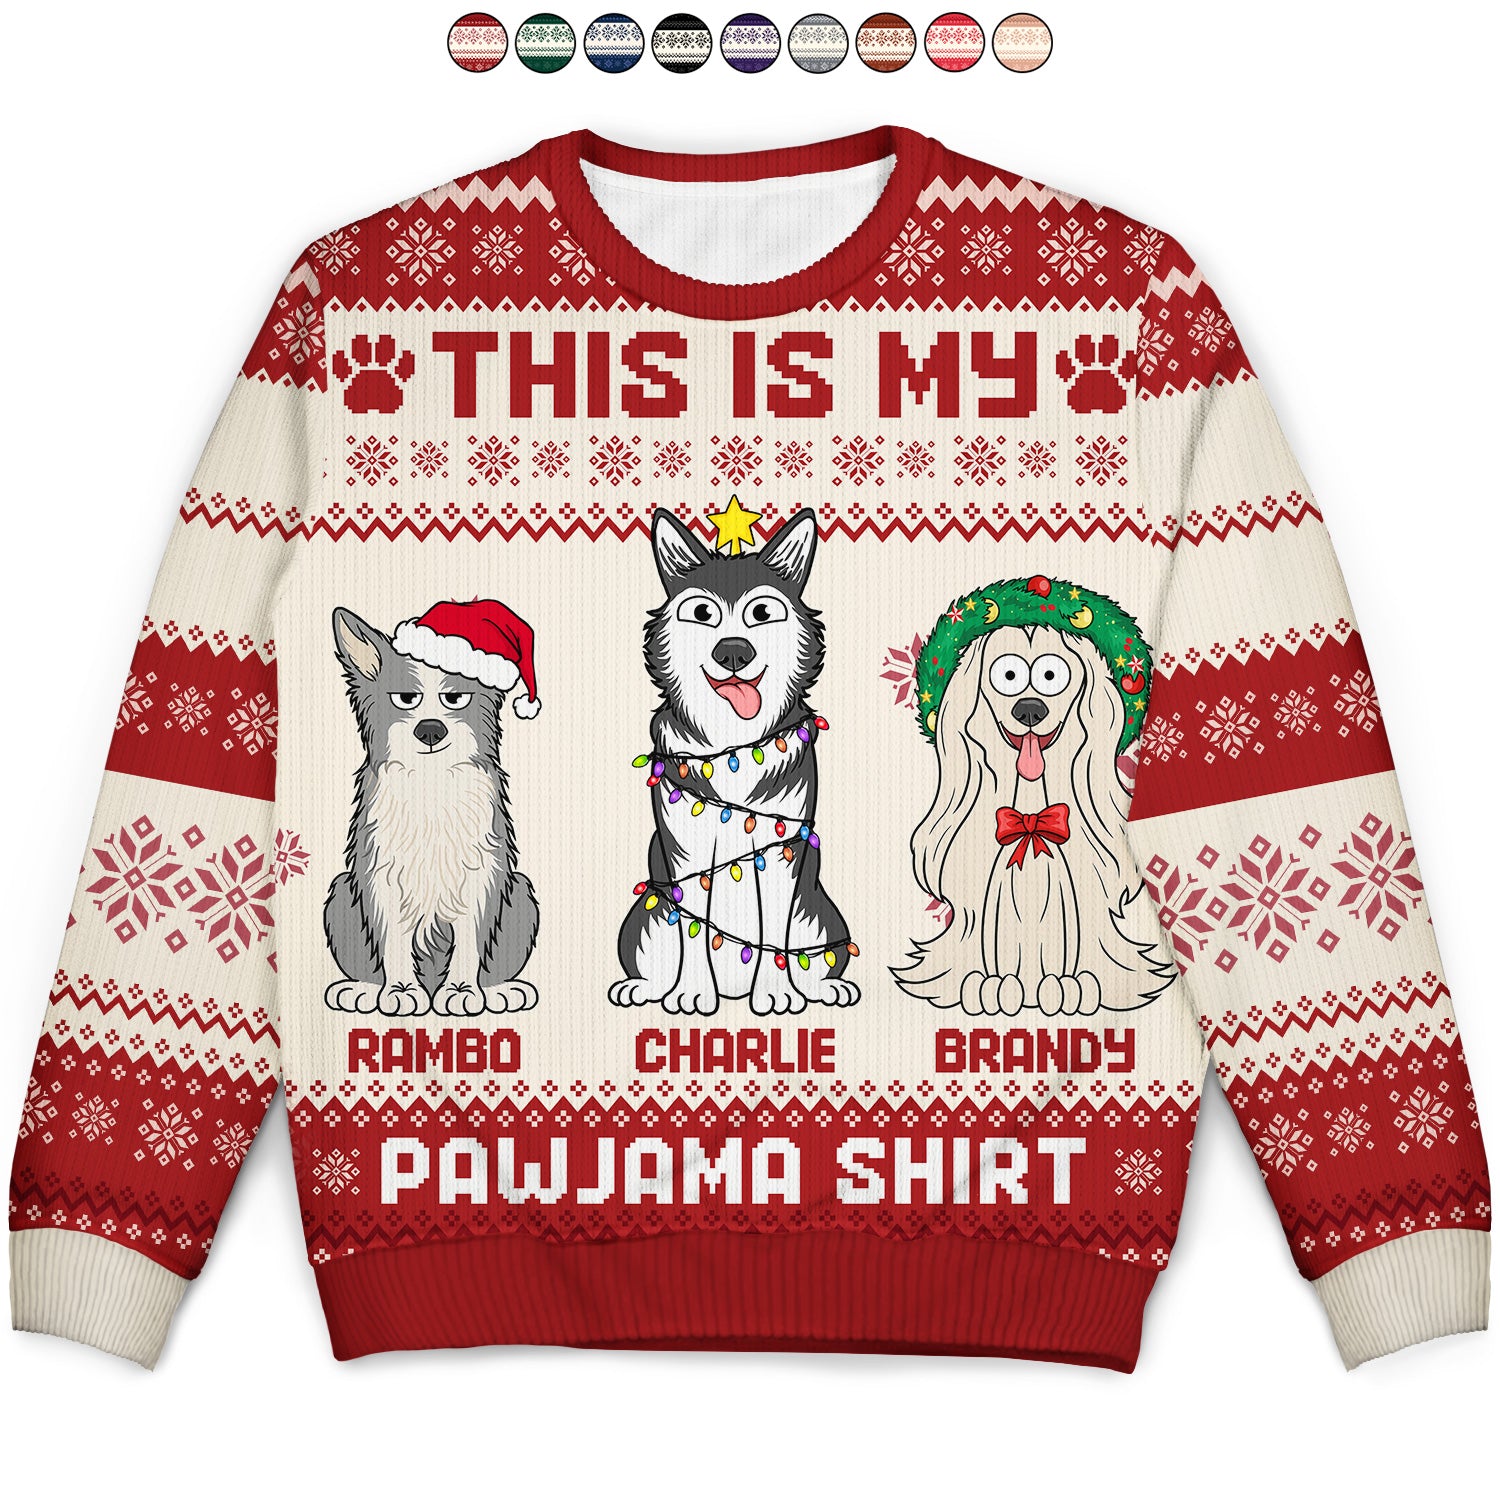 This Is My Pawjama Shirt - Christmas Gift For Dog Lover, Pet Owner - Personalized Unisex Ugly Sweater